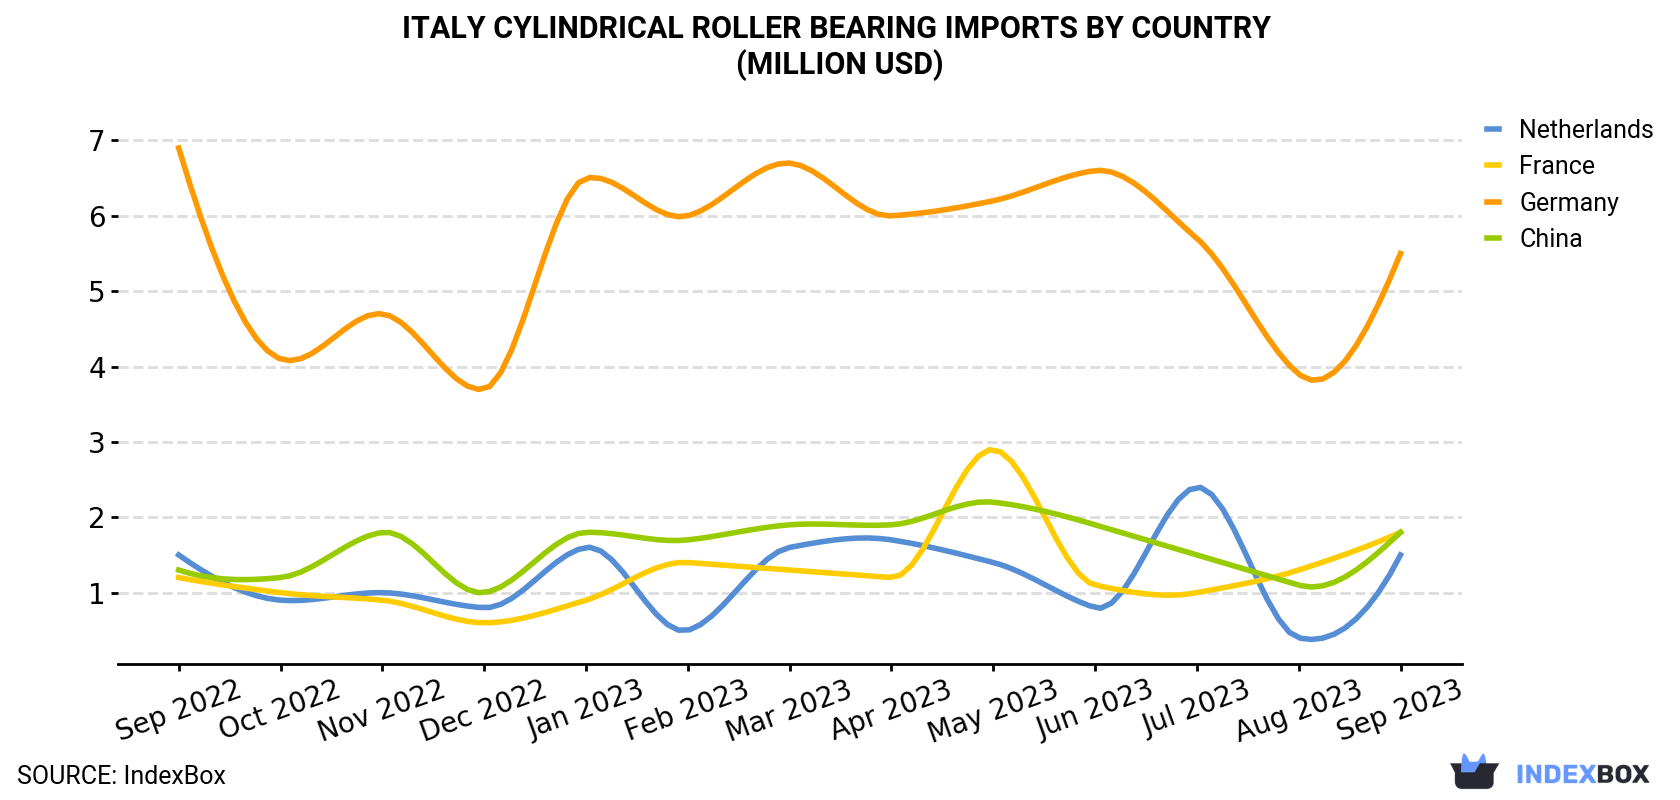 Italy Cylindrical Roller Bearing Imports By Country (Million USD)